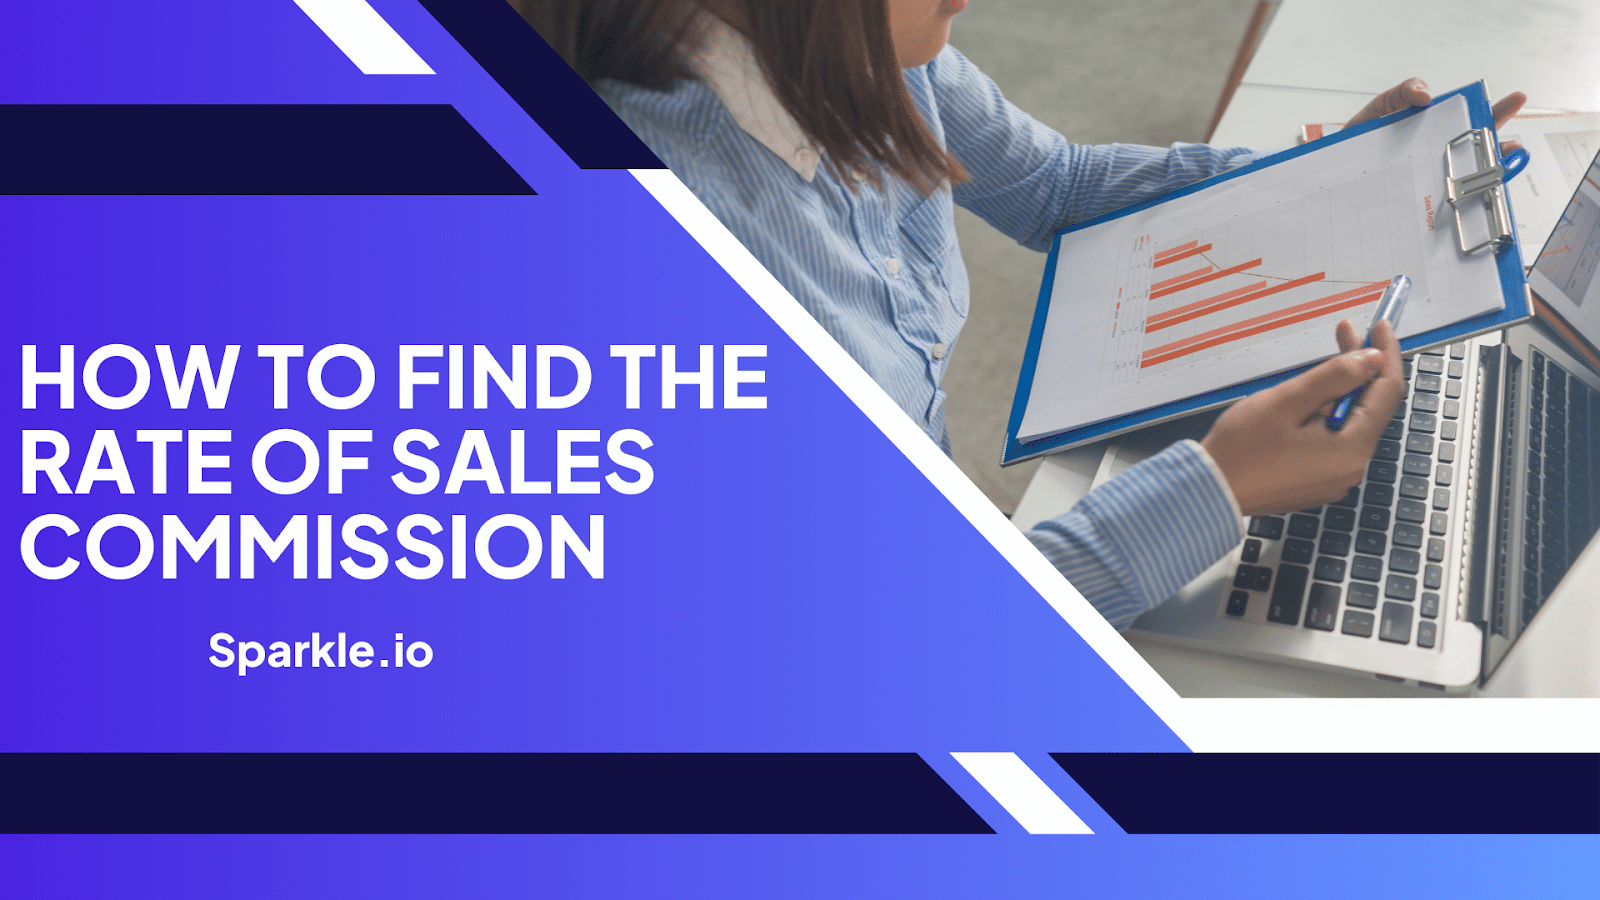 How To Find The Rate Of Sales Commission